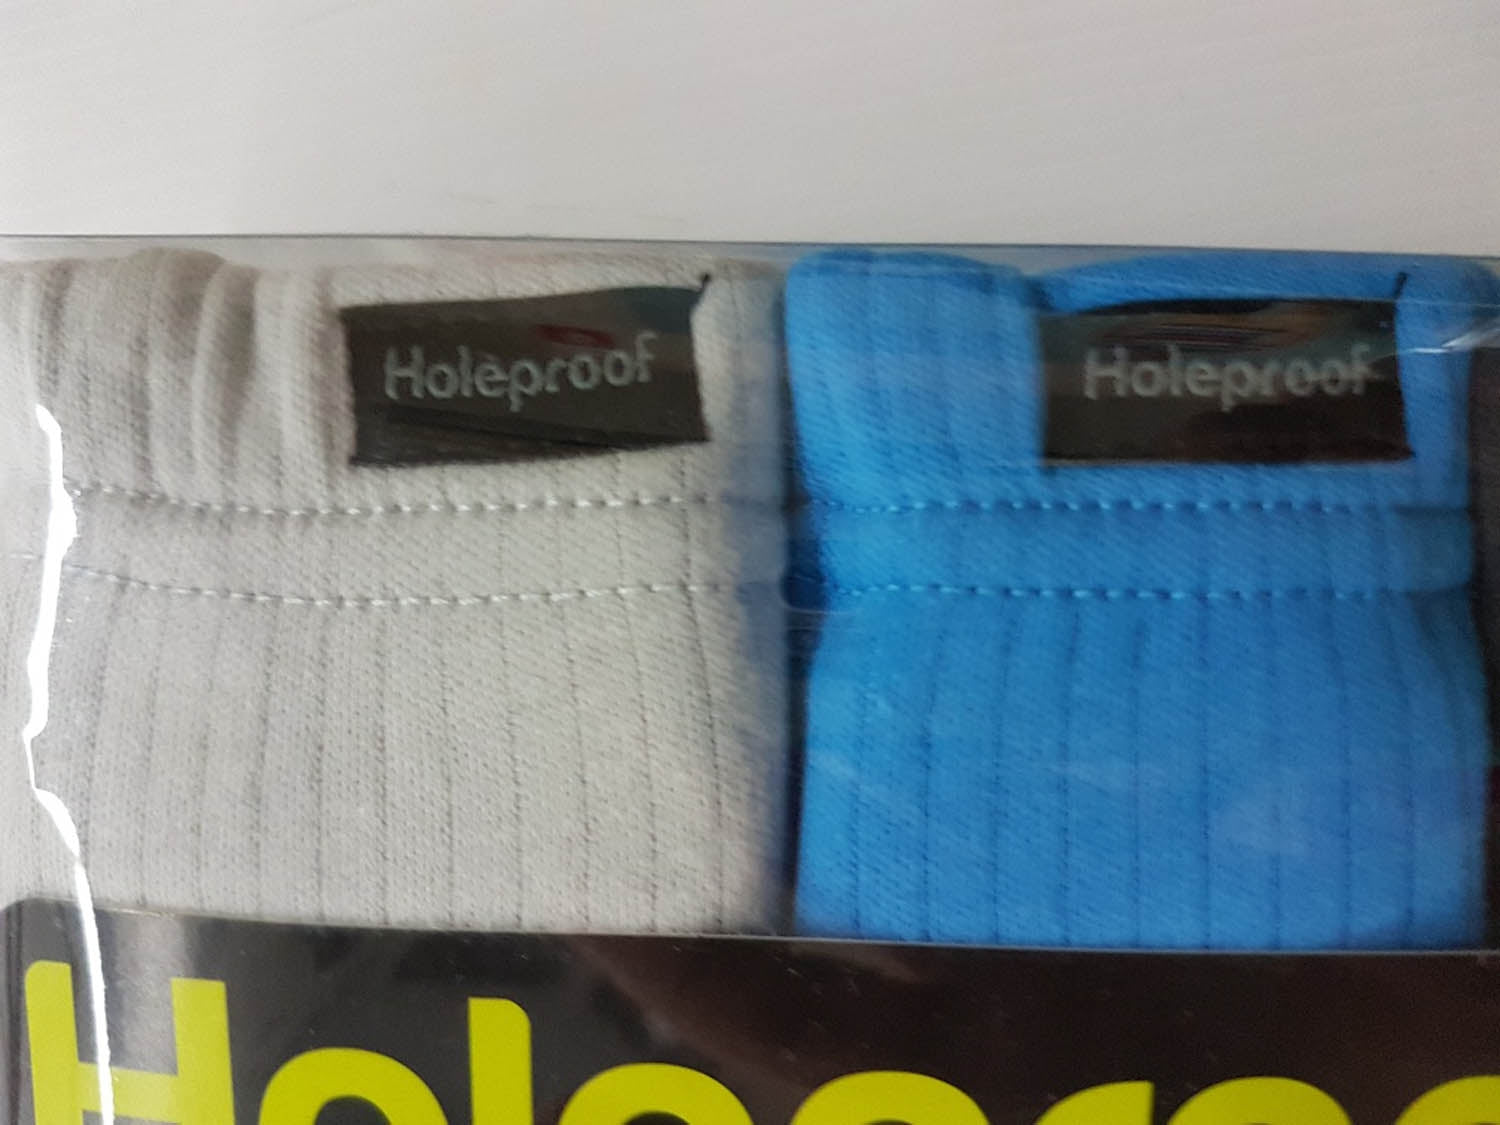 Holeproof 4 Pack Cotton Briefs - Classic Shape Assorted Mens Underwear by Holeproof | The Bloke Shop